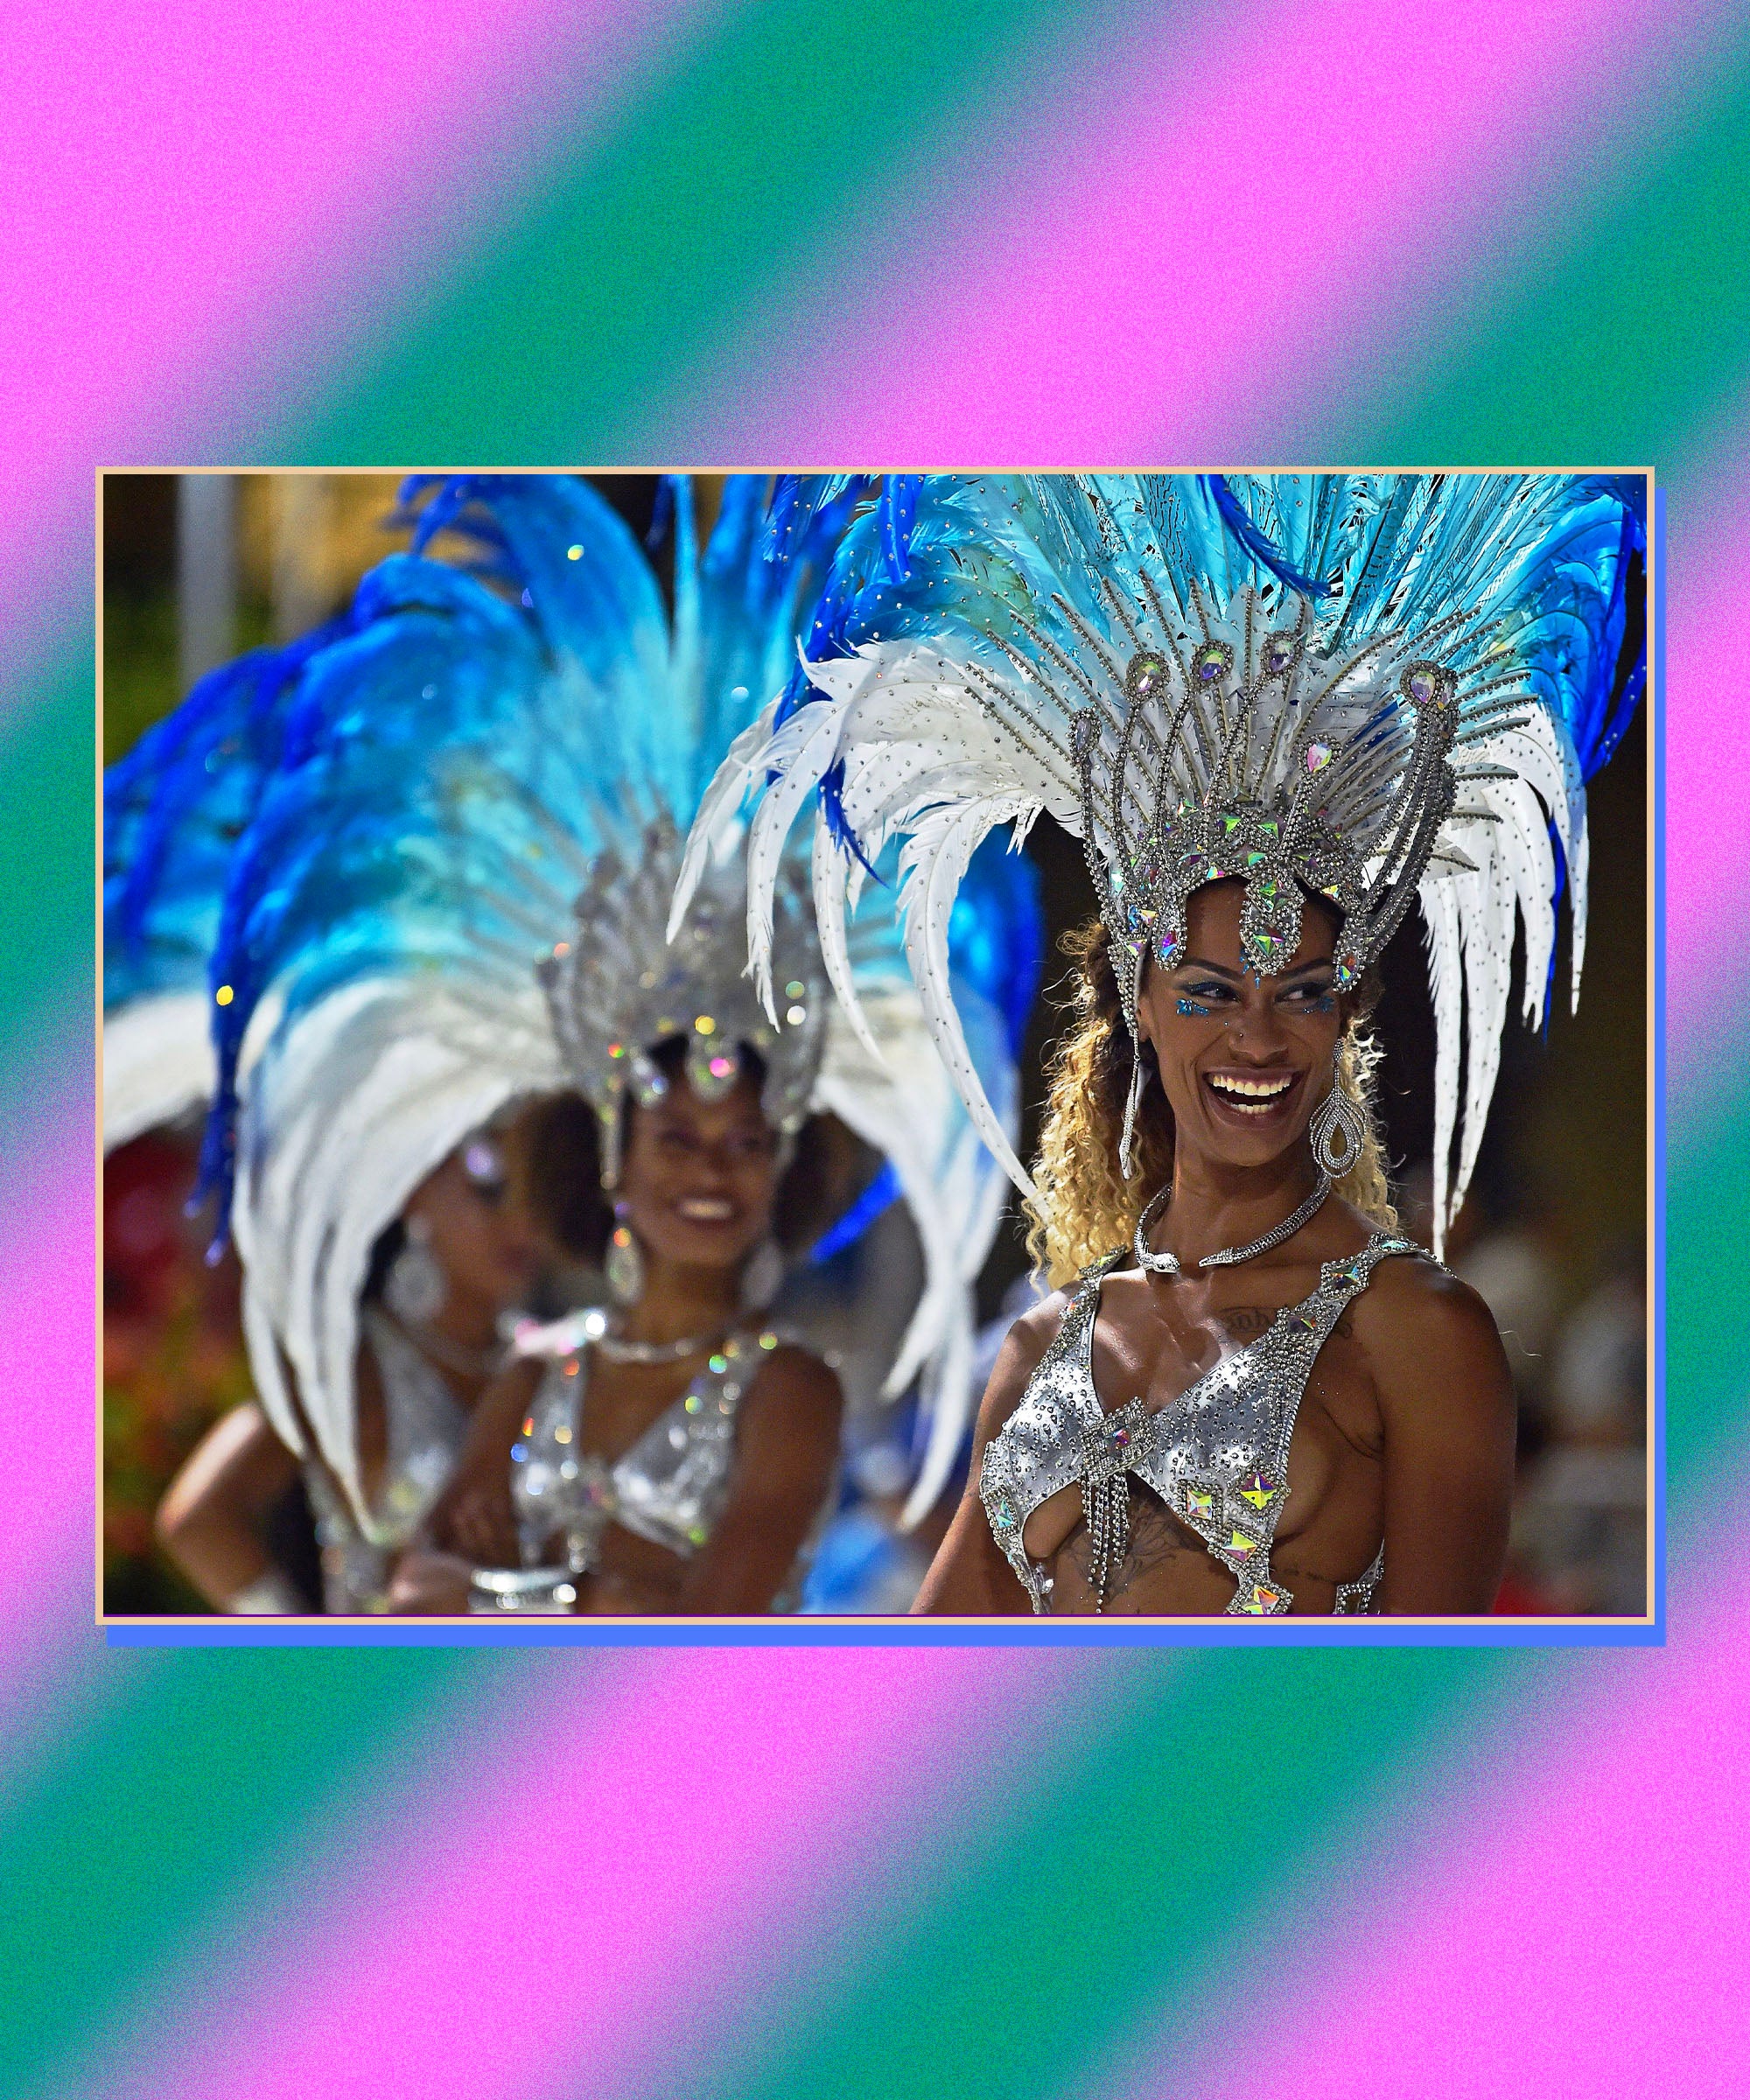 Carnival, Definition, Festival, Traditions, Countries, & Facts